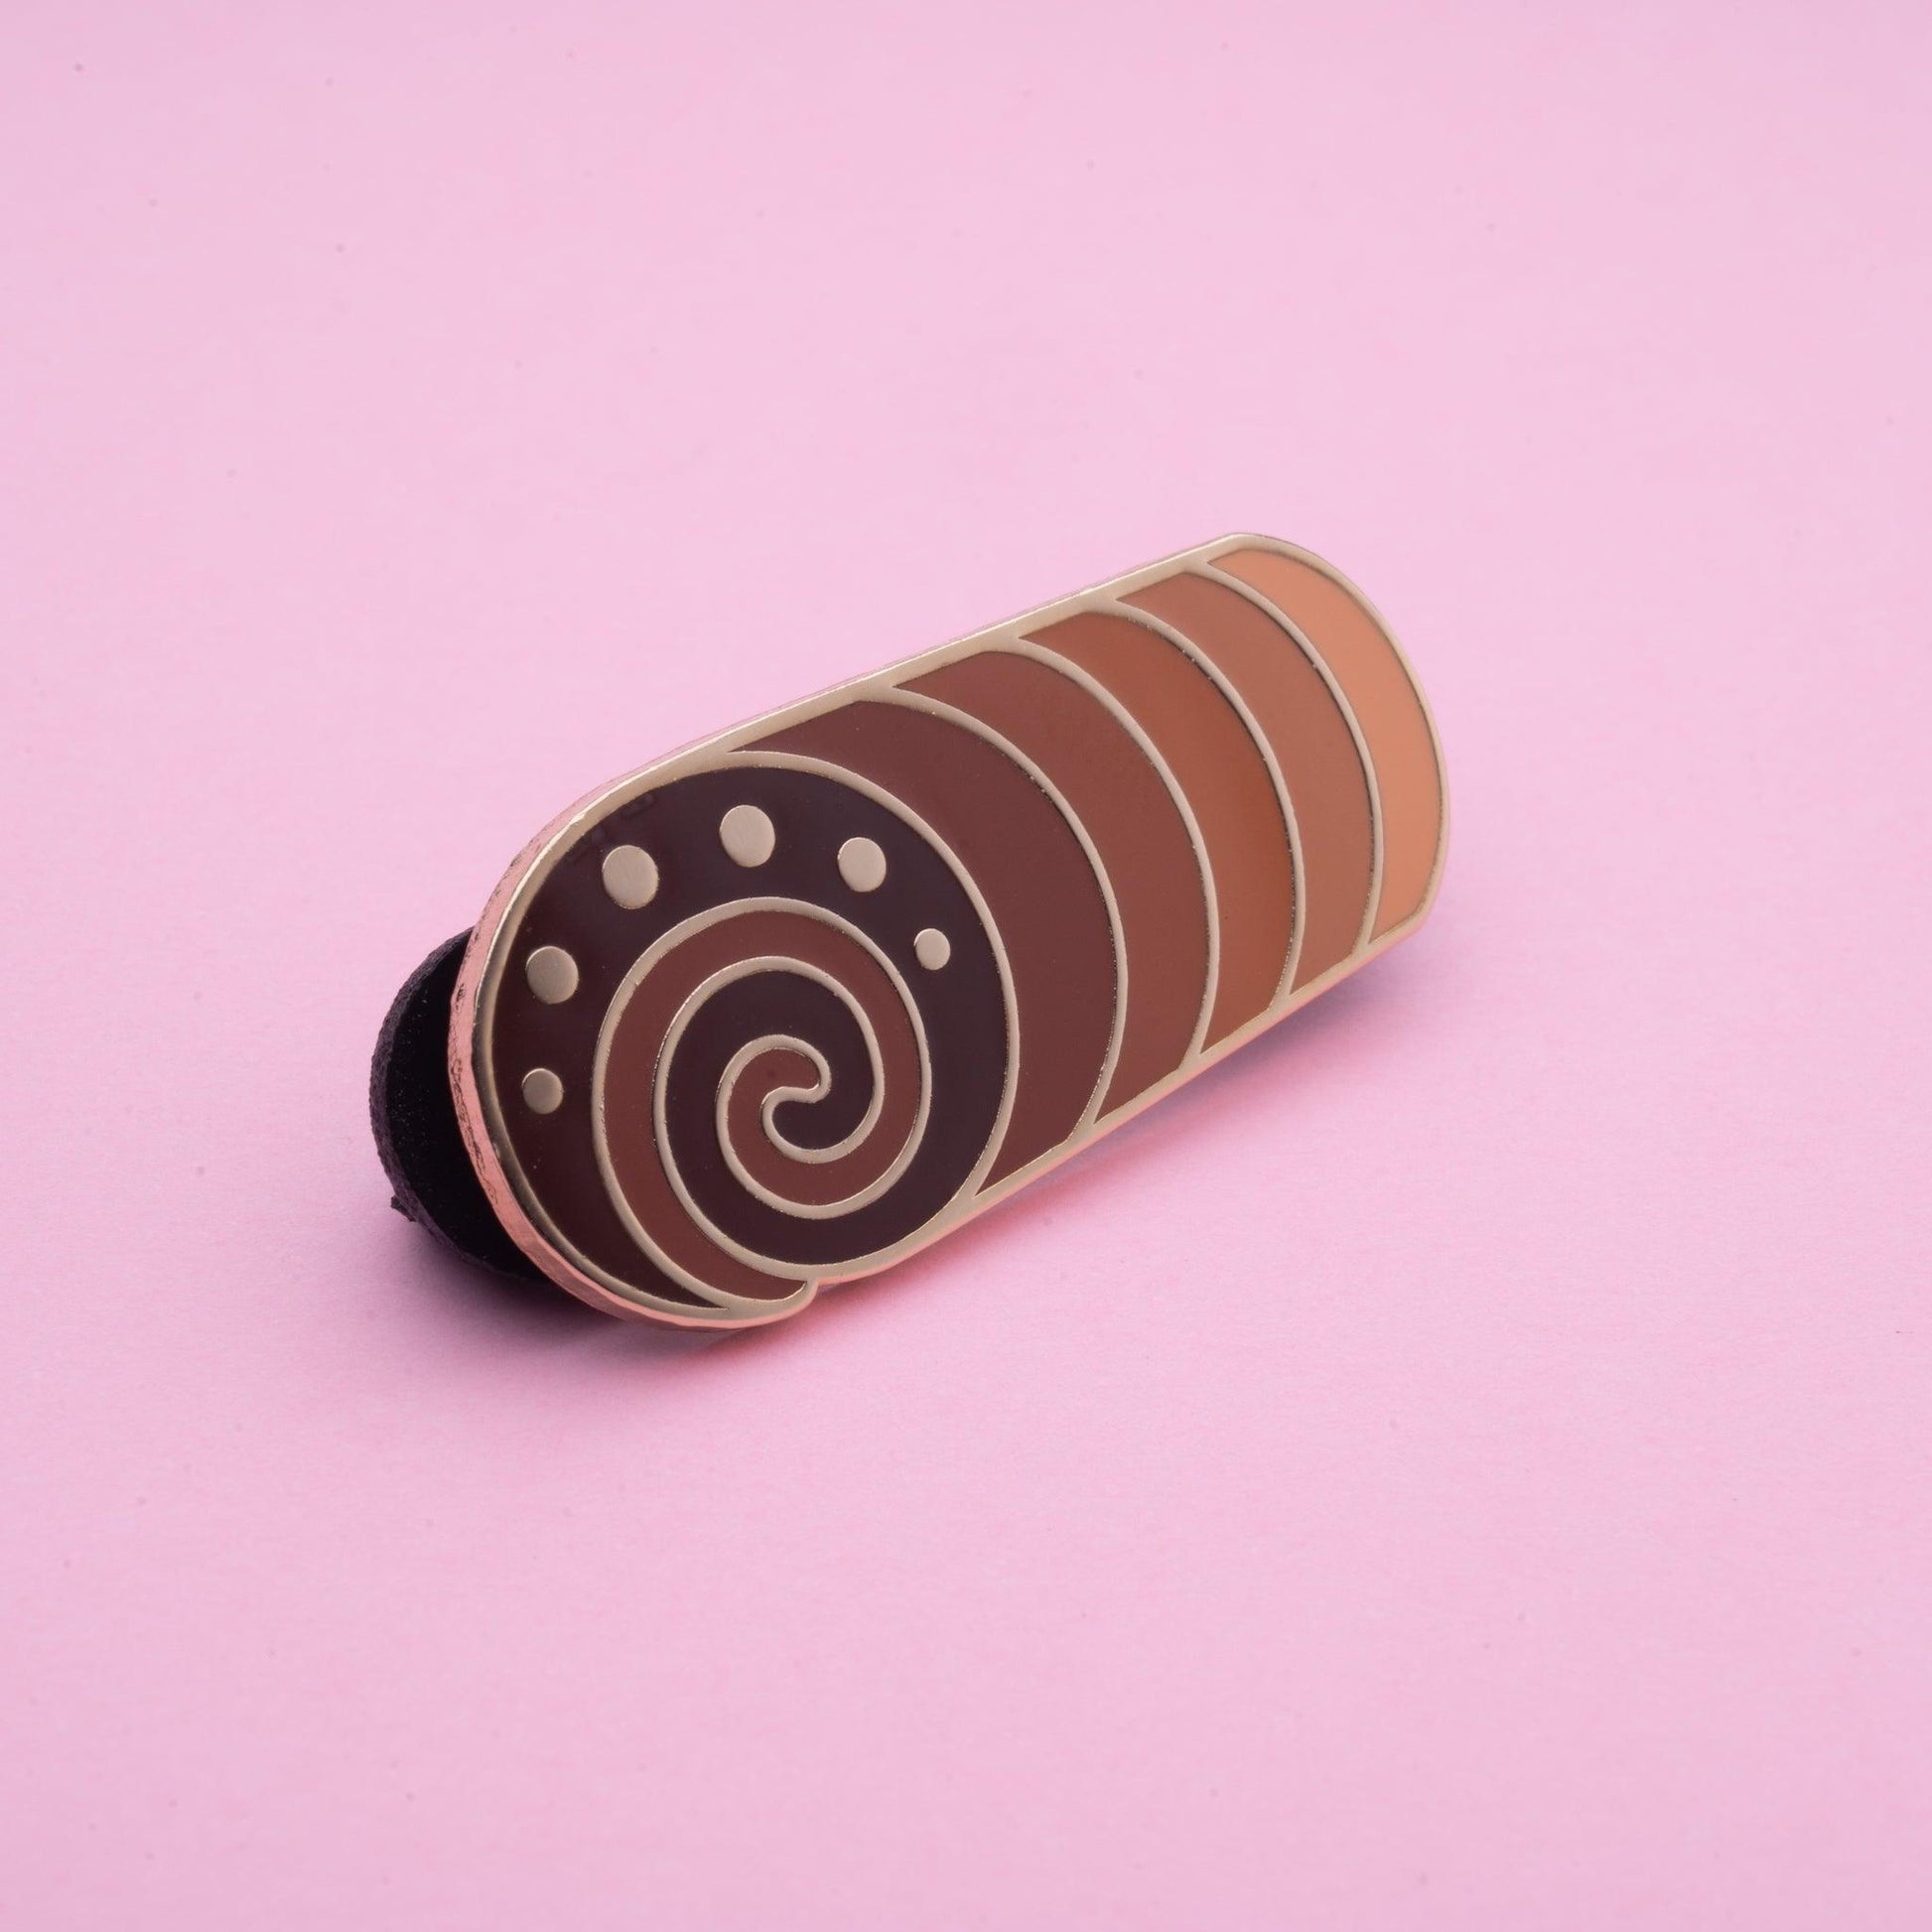 chocolate cake swirl enamel pin where each section is a different shade of chocolate and at the front is the darkest chocolate and a brown chocolate cream swirl